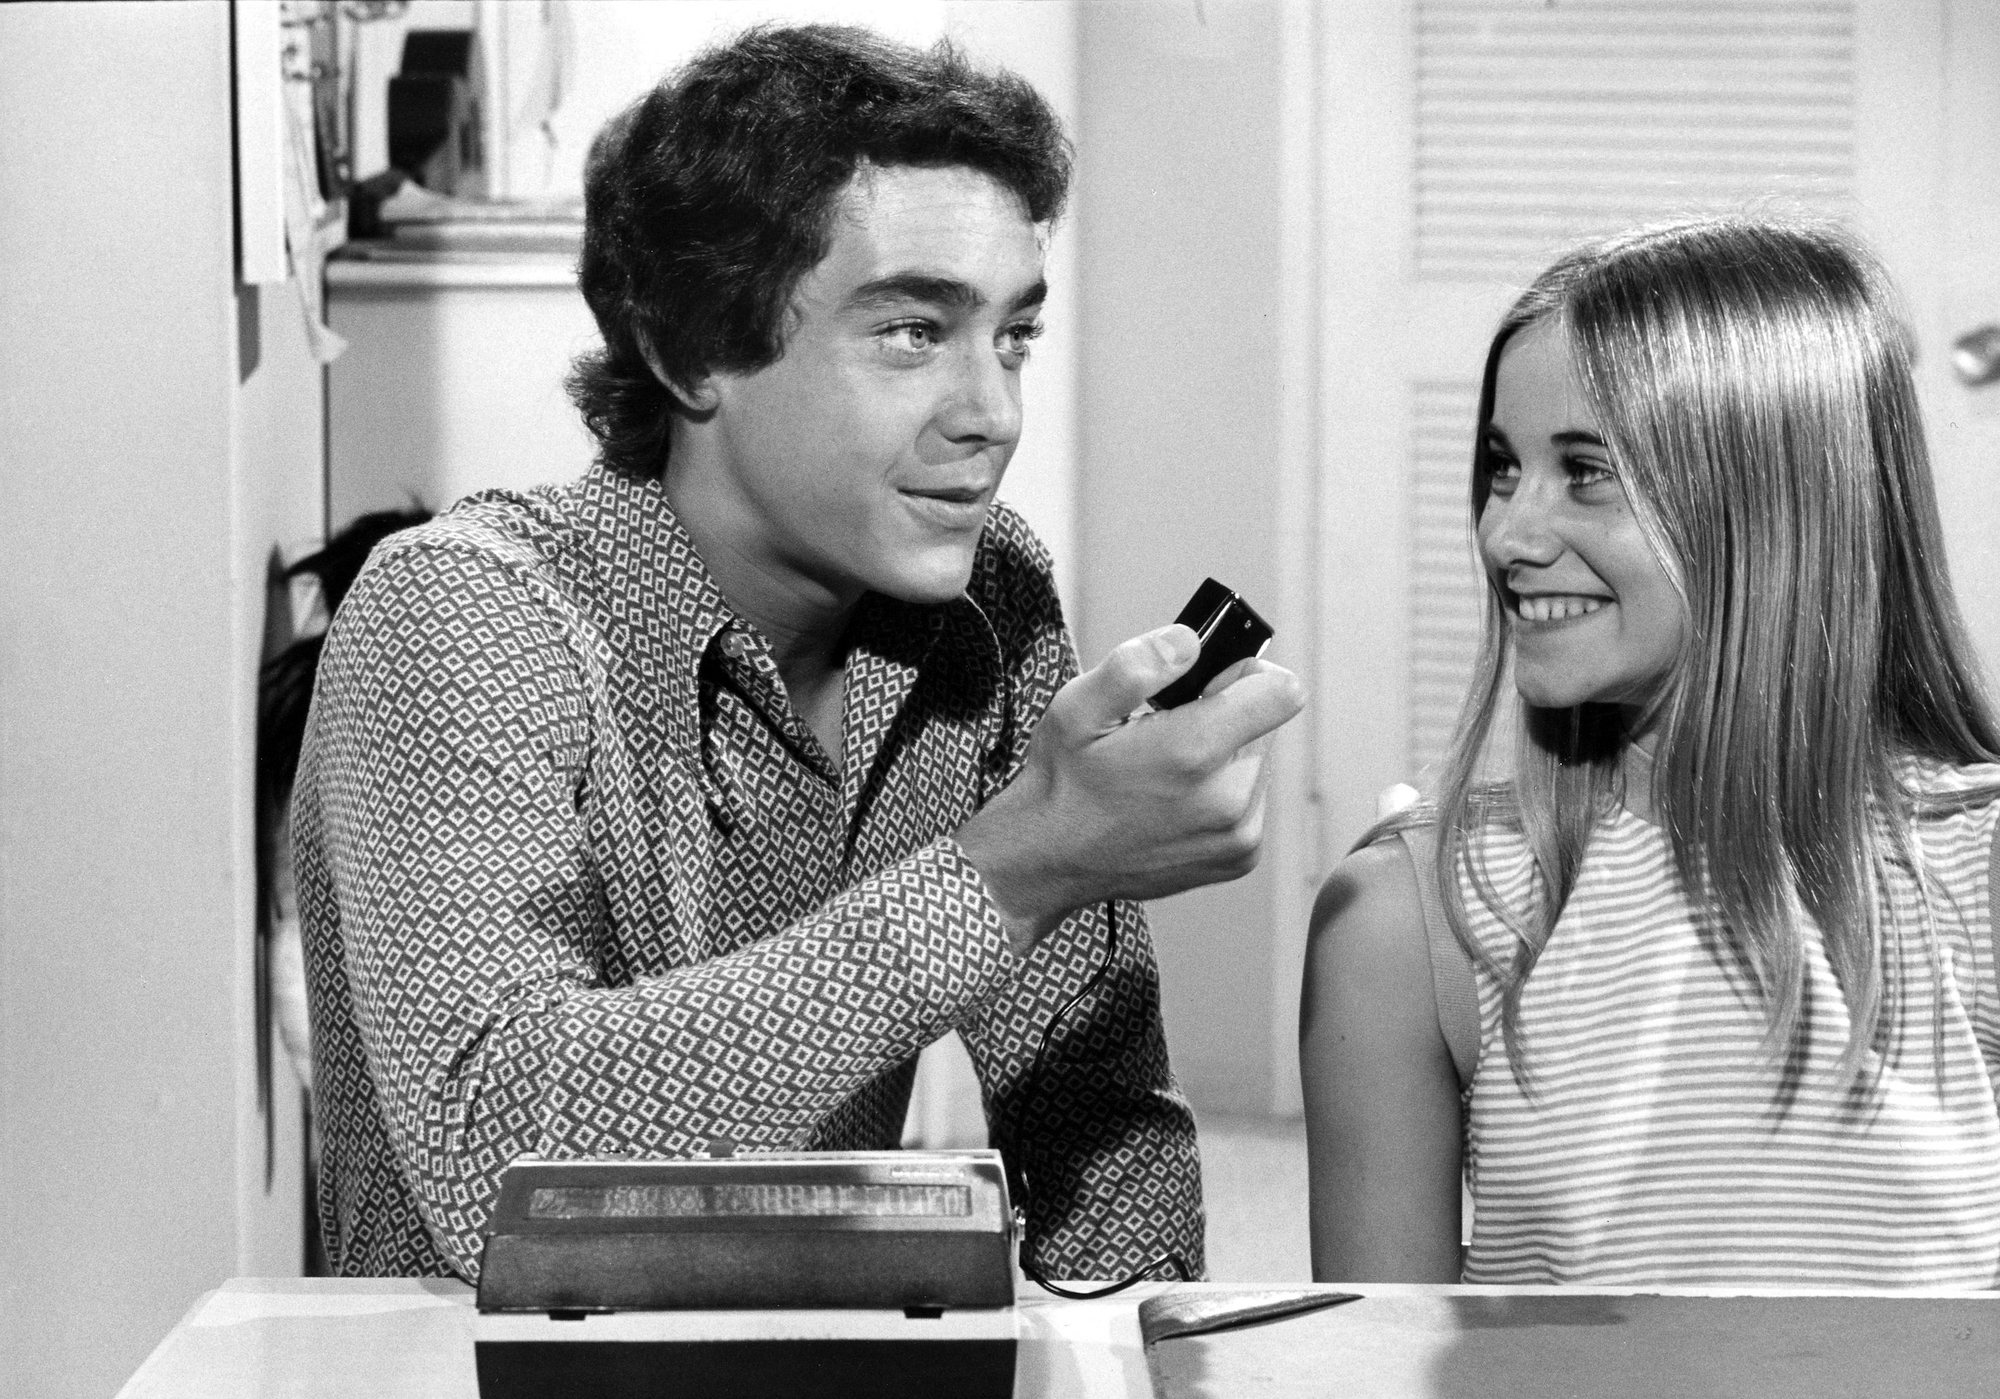 Barry Williams and Maureen McCormick on 'The Brady Bunch' in black and white